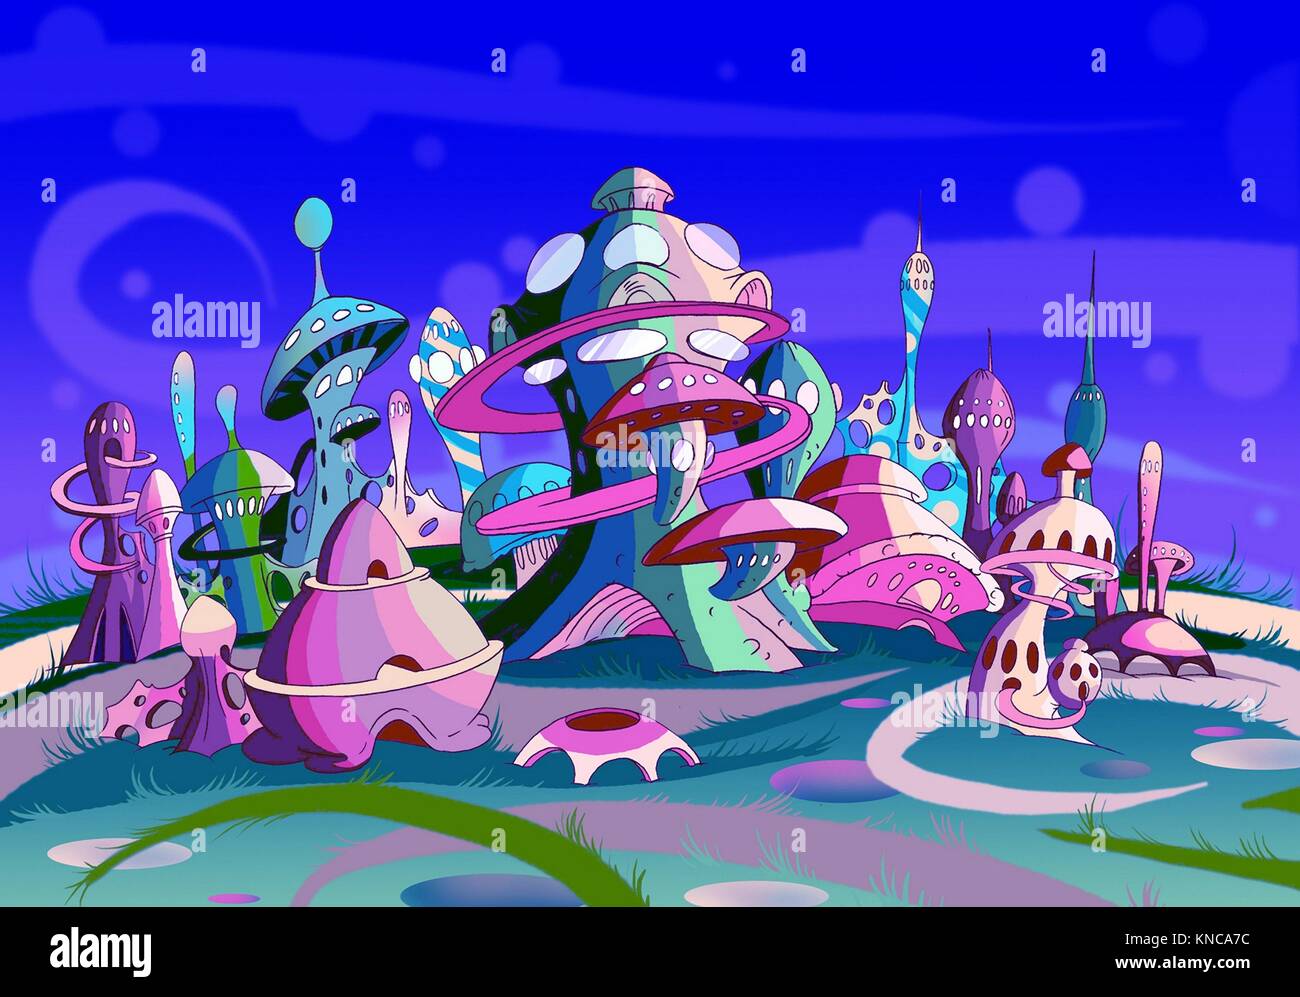 Digital Painting, Illustration of a Futuristic Alien City. Fantastic Cartoon  Style Character, Fairy Tale Story Background, Card Design Stock Photo -  Alamy